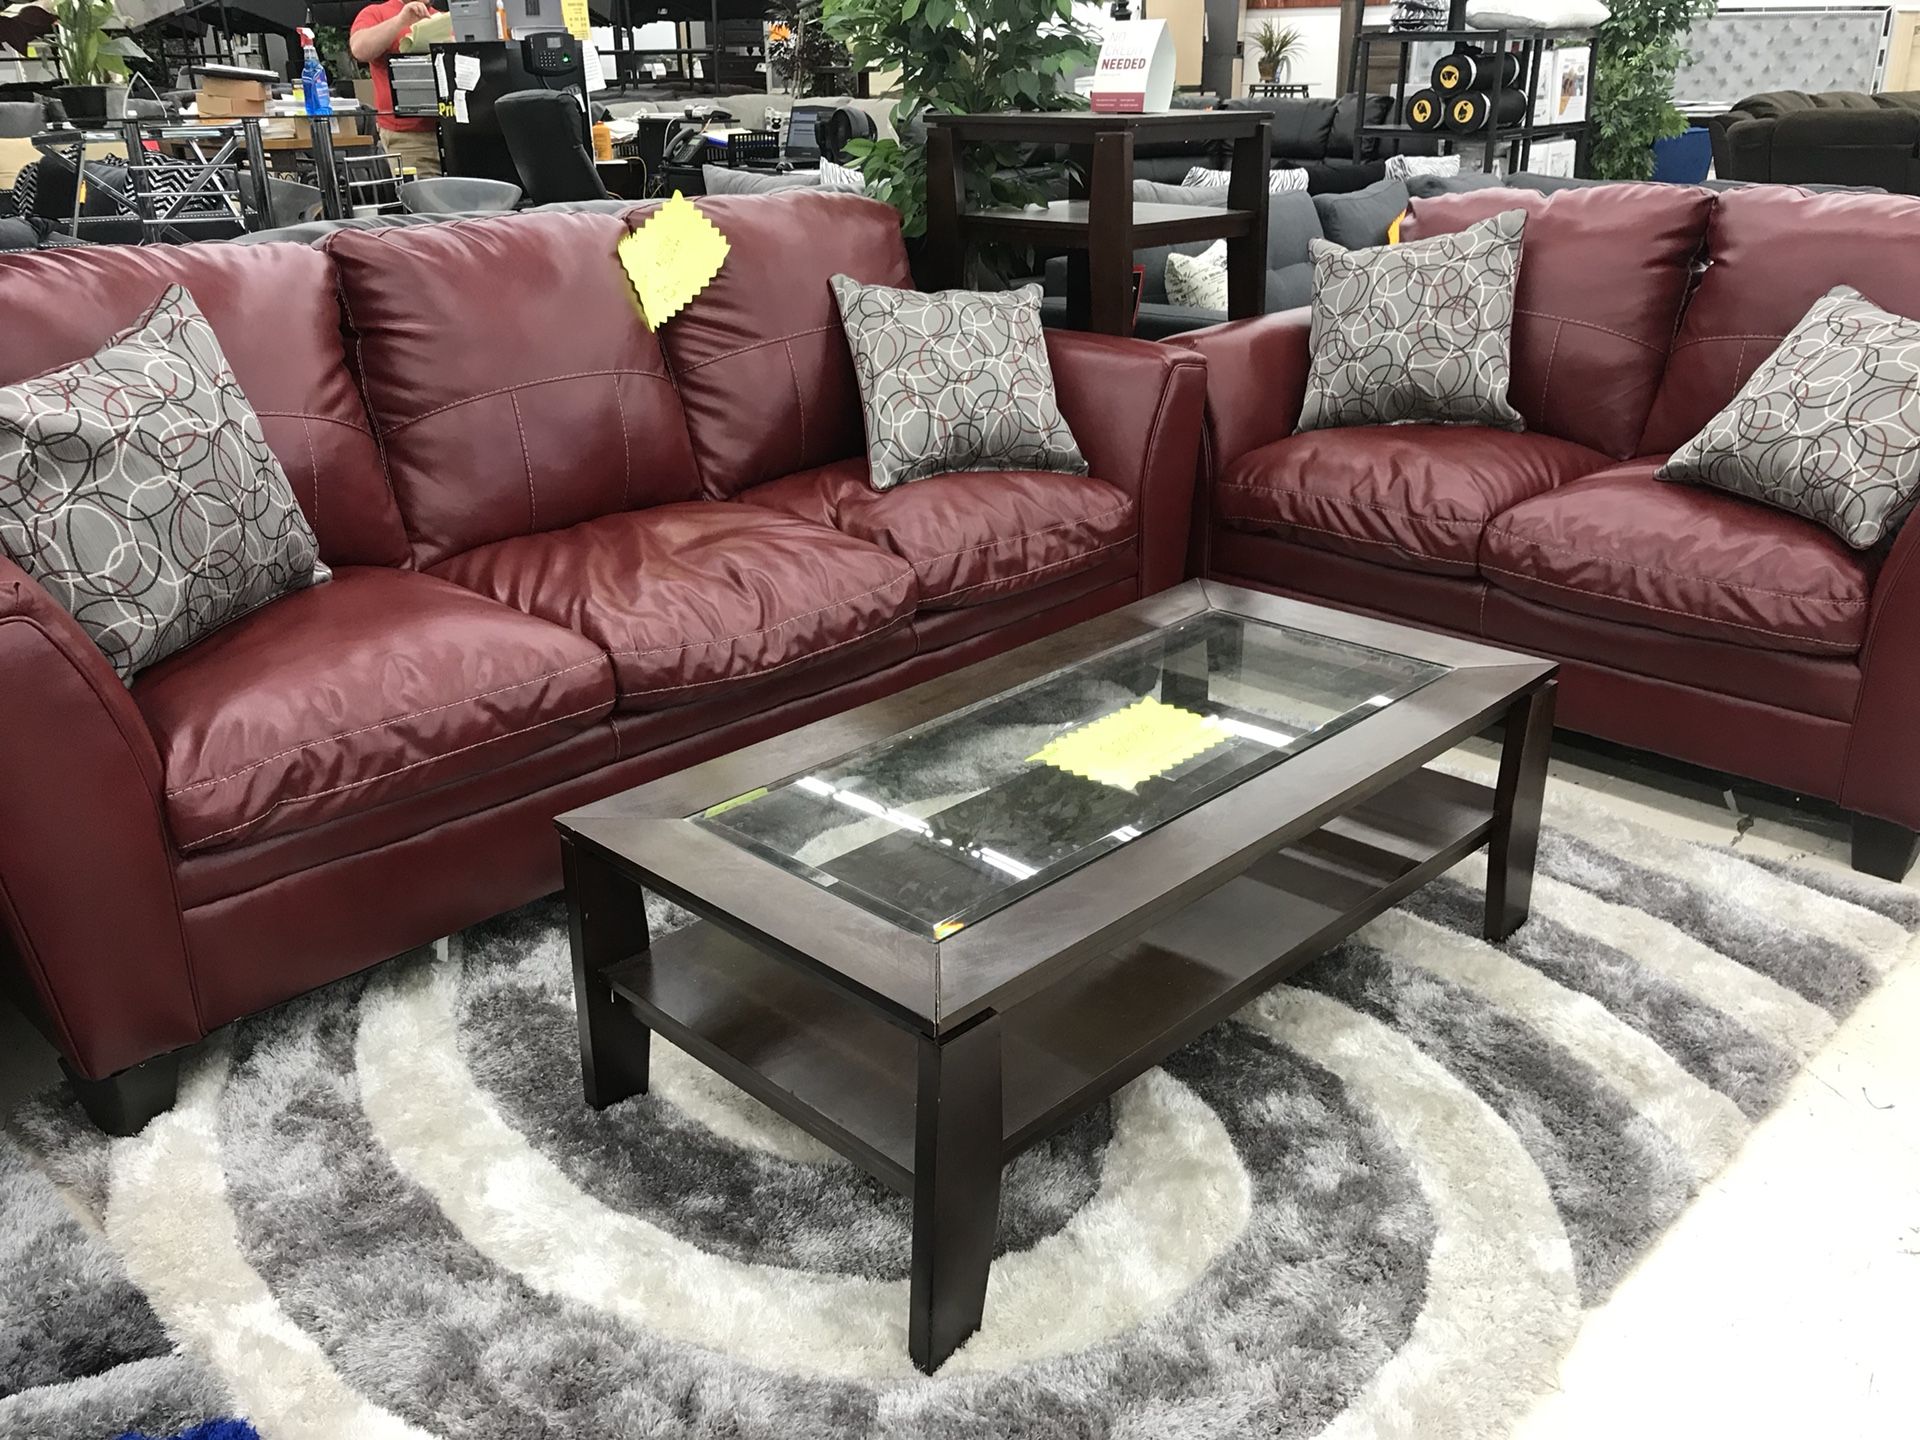 RED BONDED LEATHER LIVING ROOM SET SOFA AND LOVESEAT ON SALE